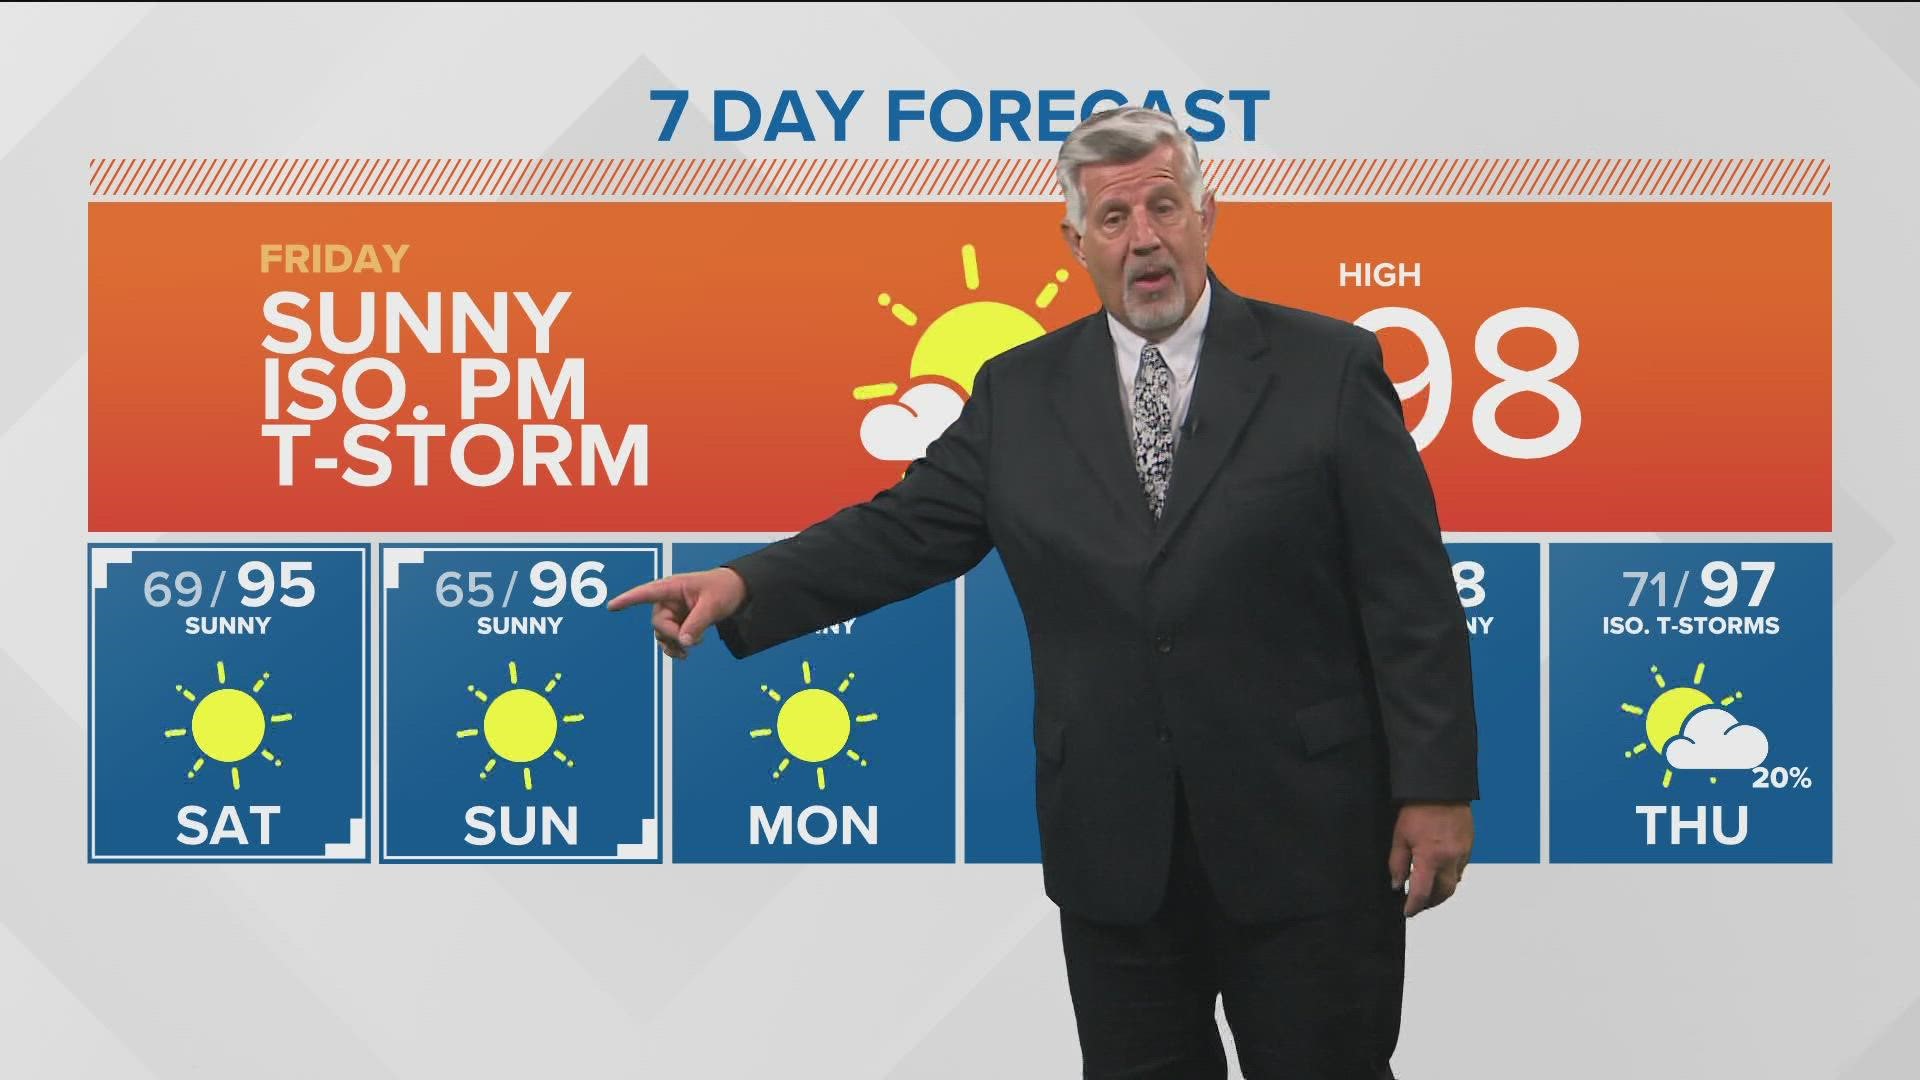 KTVB First Alert Weather Friday, Aug. 12, 2022, with meteorologist Jim Duthie.